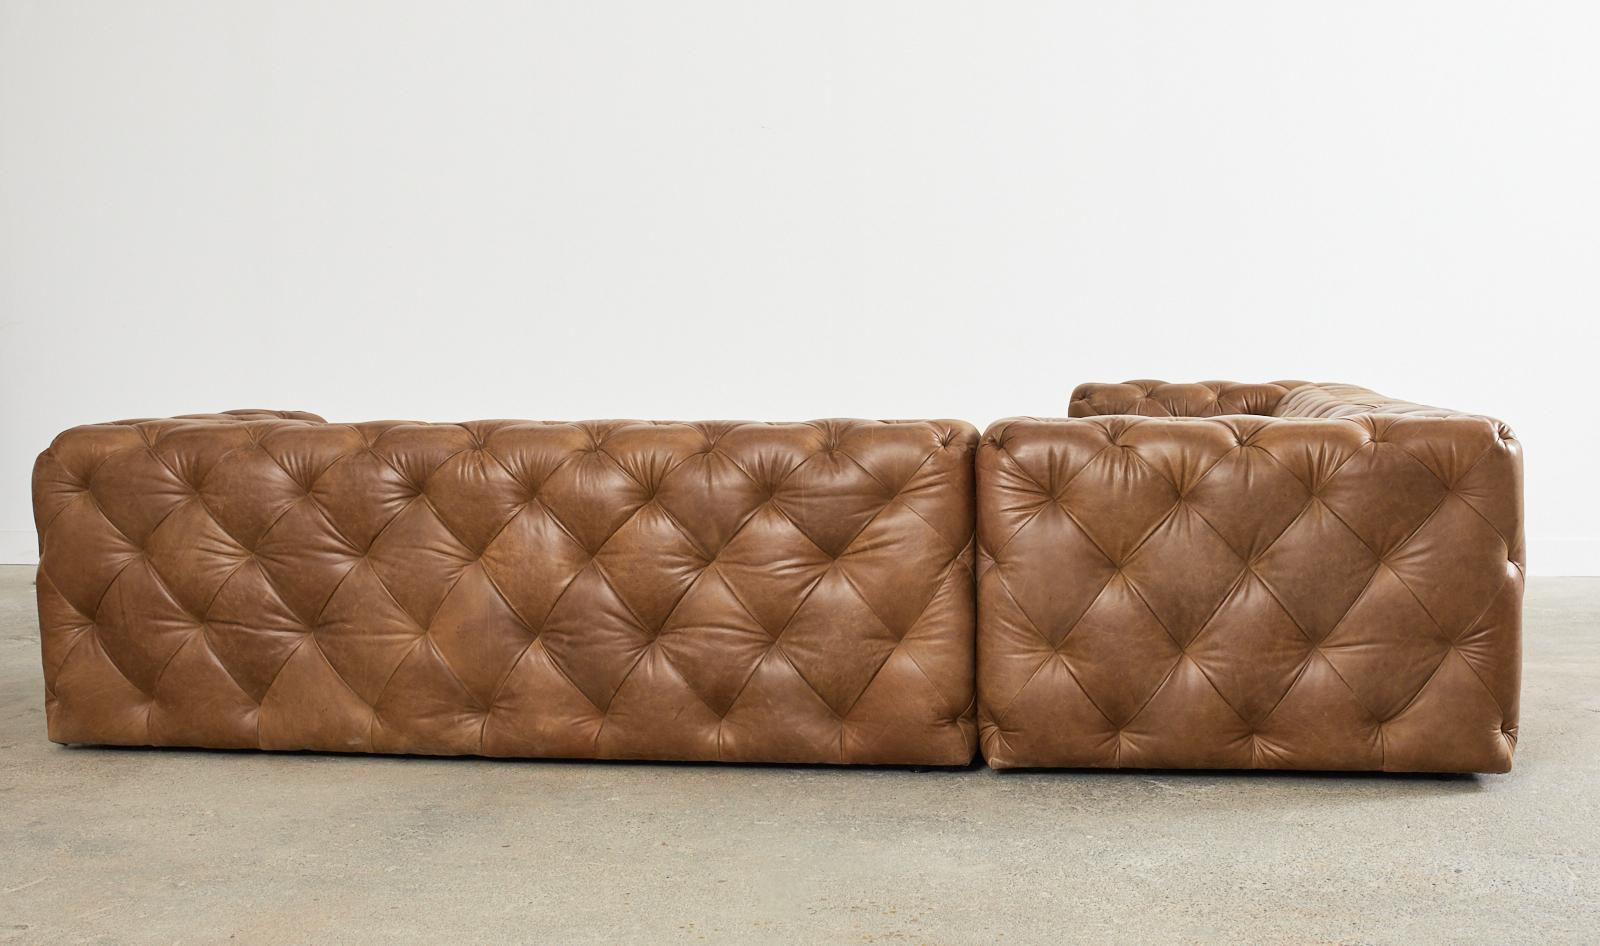 Neiman-Marcus Three Piece Tufted Leather Sectional Sofa 10